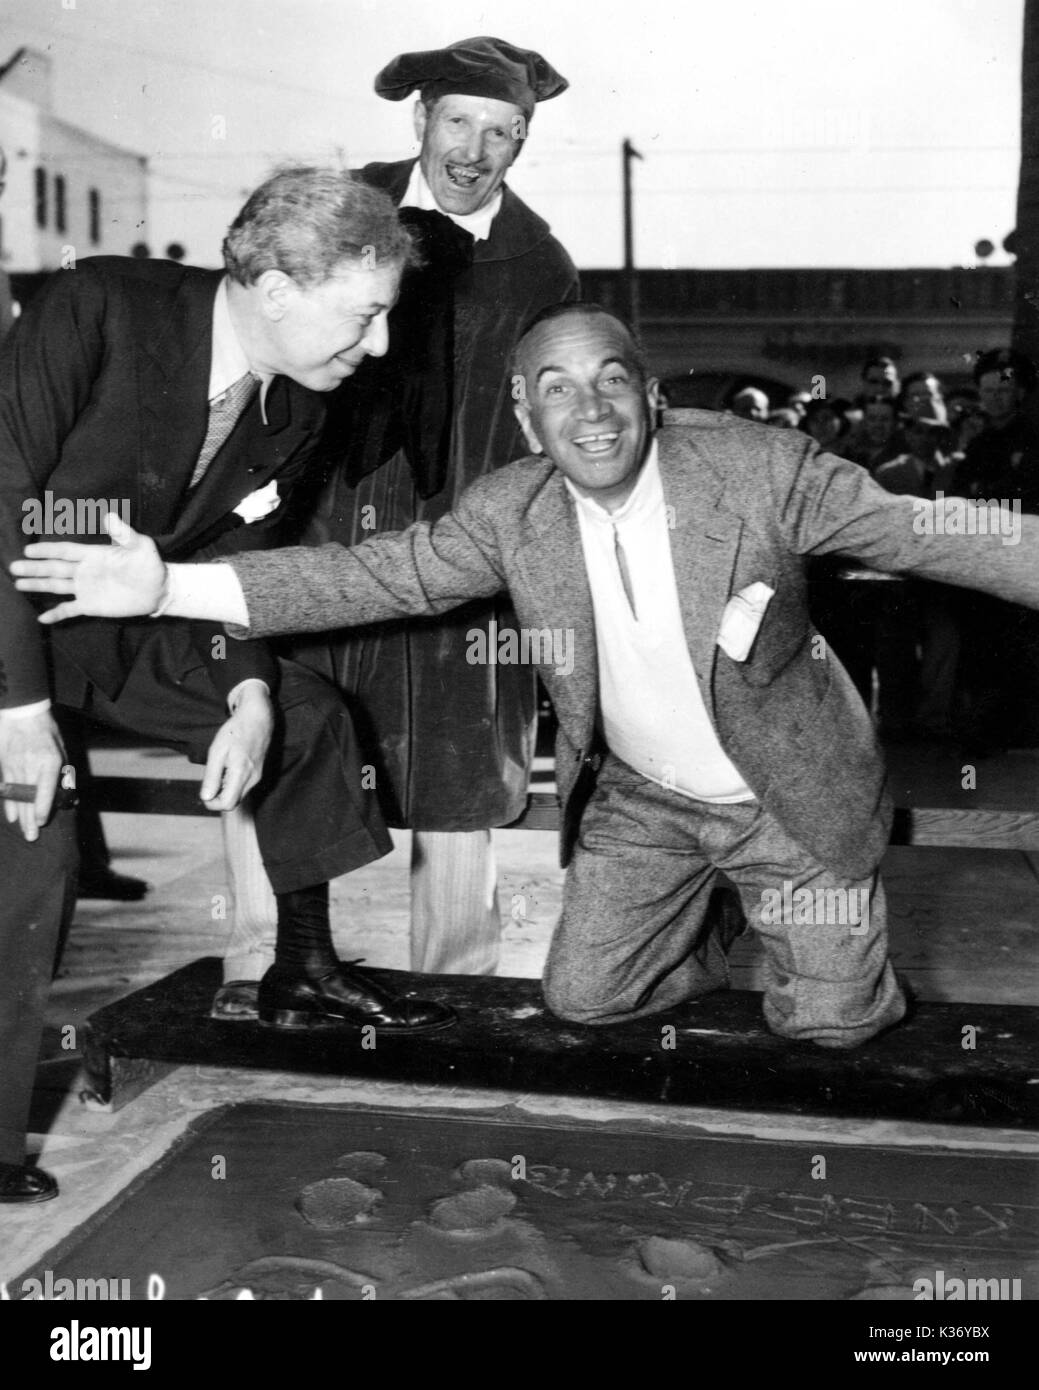 Al Jolson celebrating just having made his hand, foot and knee-prints in the concrete at Sid Grauman's Chinese Theatre in hollywood. Sid Grauman is left looking directly at Jolson. Stock Photo